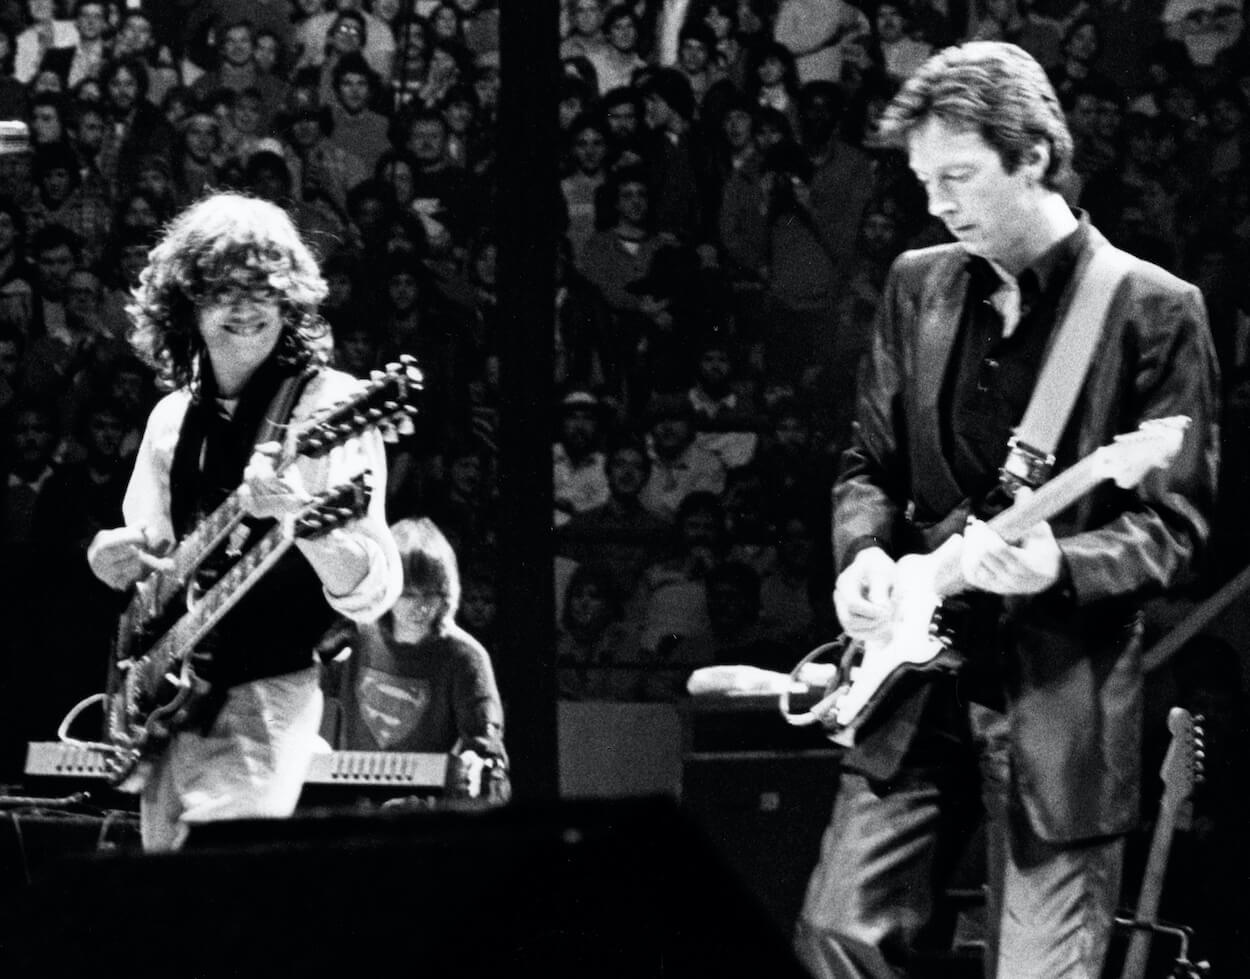 Jimmy Page (left) of Led Zeppelin and Eric Clapton perform at Action Research into Multiple Sclerosis benefit concert on December 9, 1983.